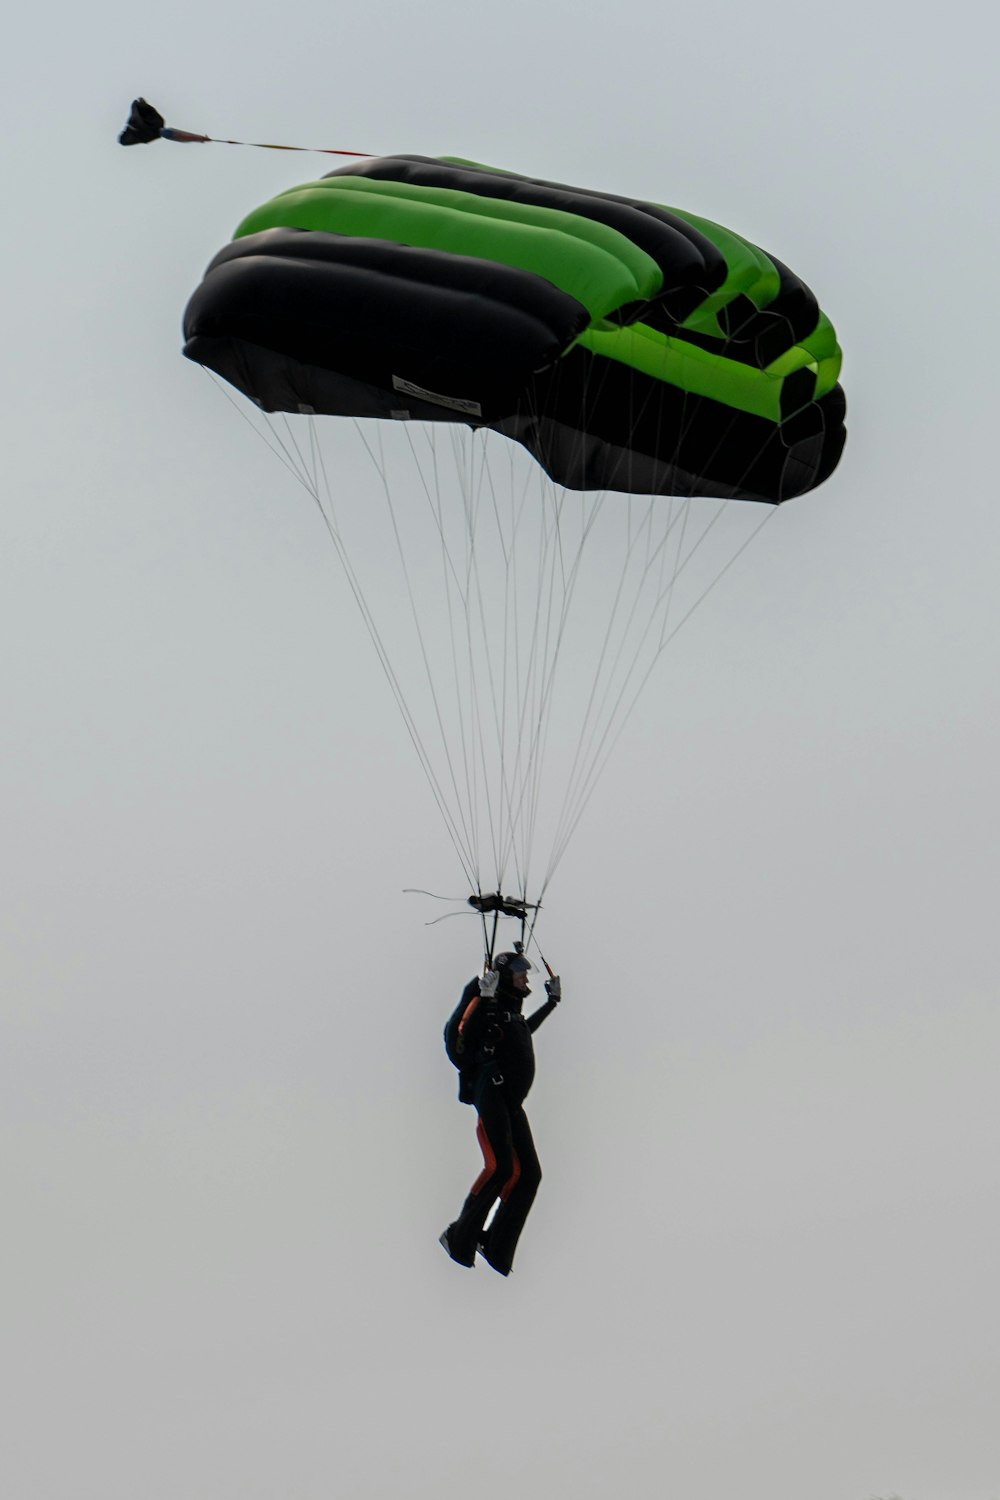 a man is parasailing in the sky with a green and black parachute